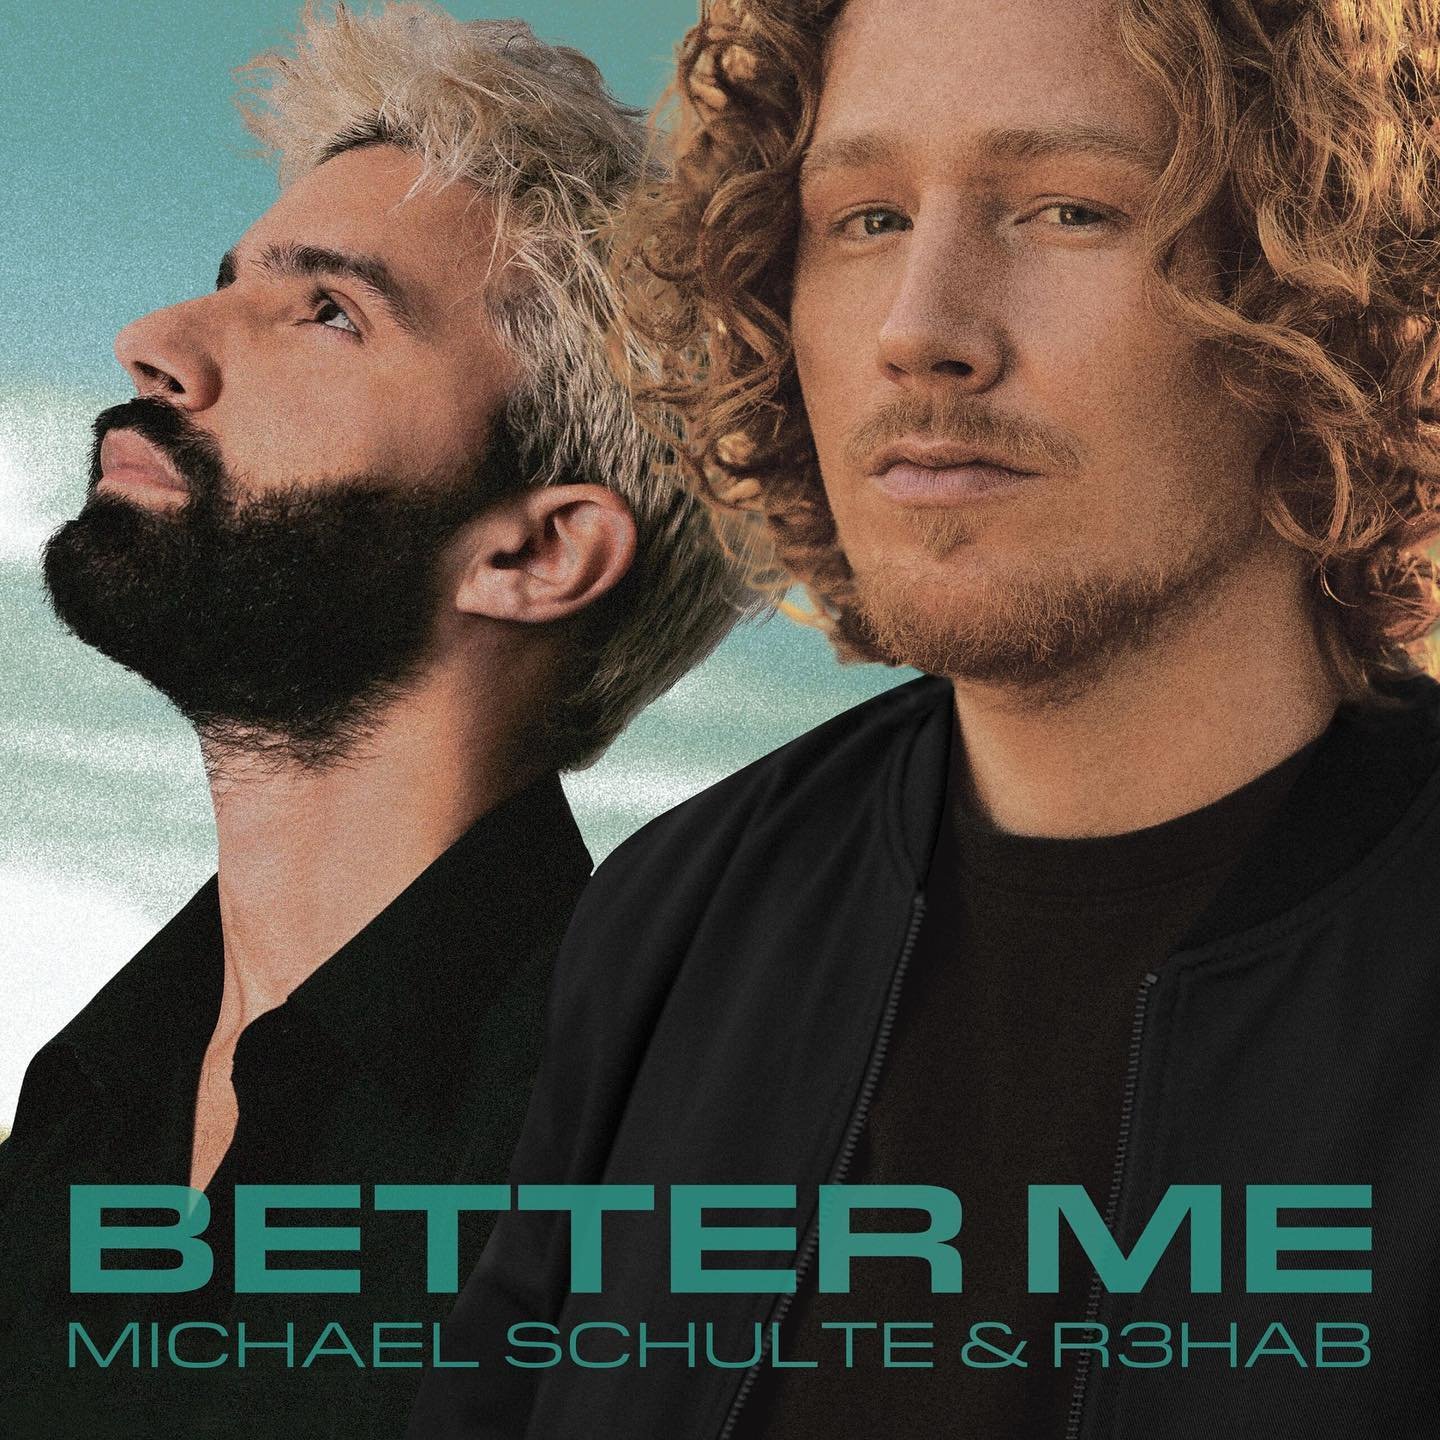 After the huge radio success of their last colab. @michaelschulte + @r3hab release &ldquo;Better Me&rdquo; co-written by @thisishight